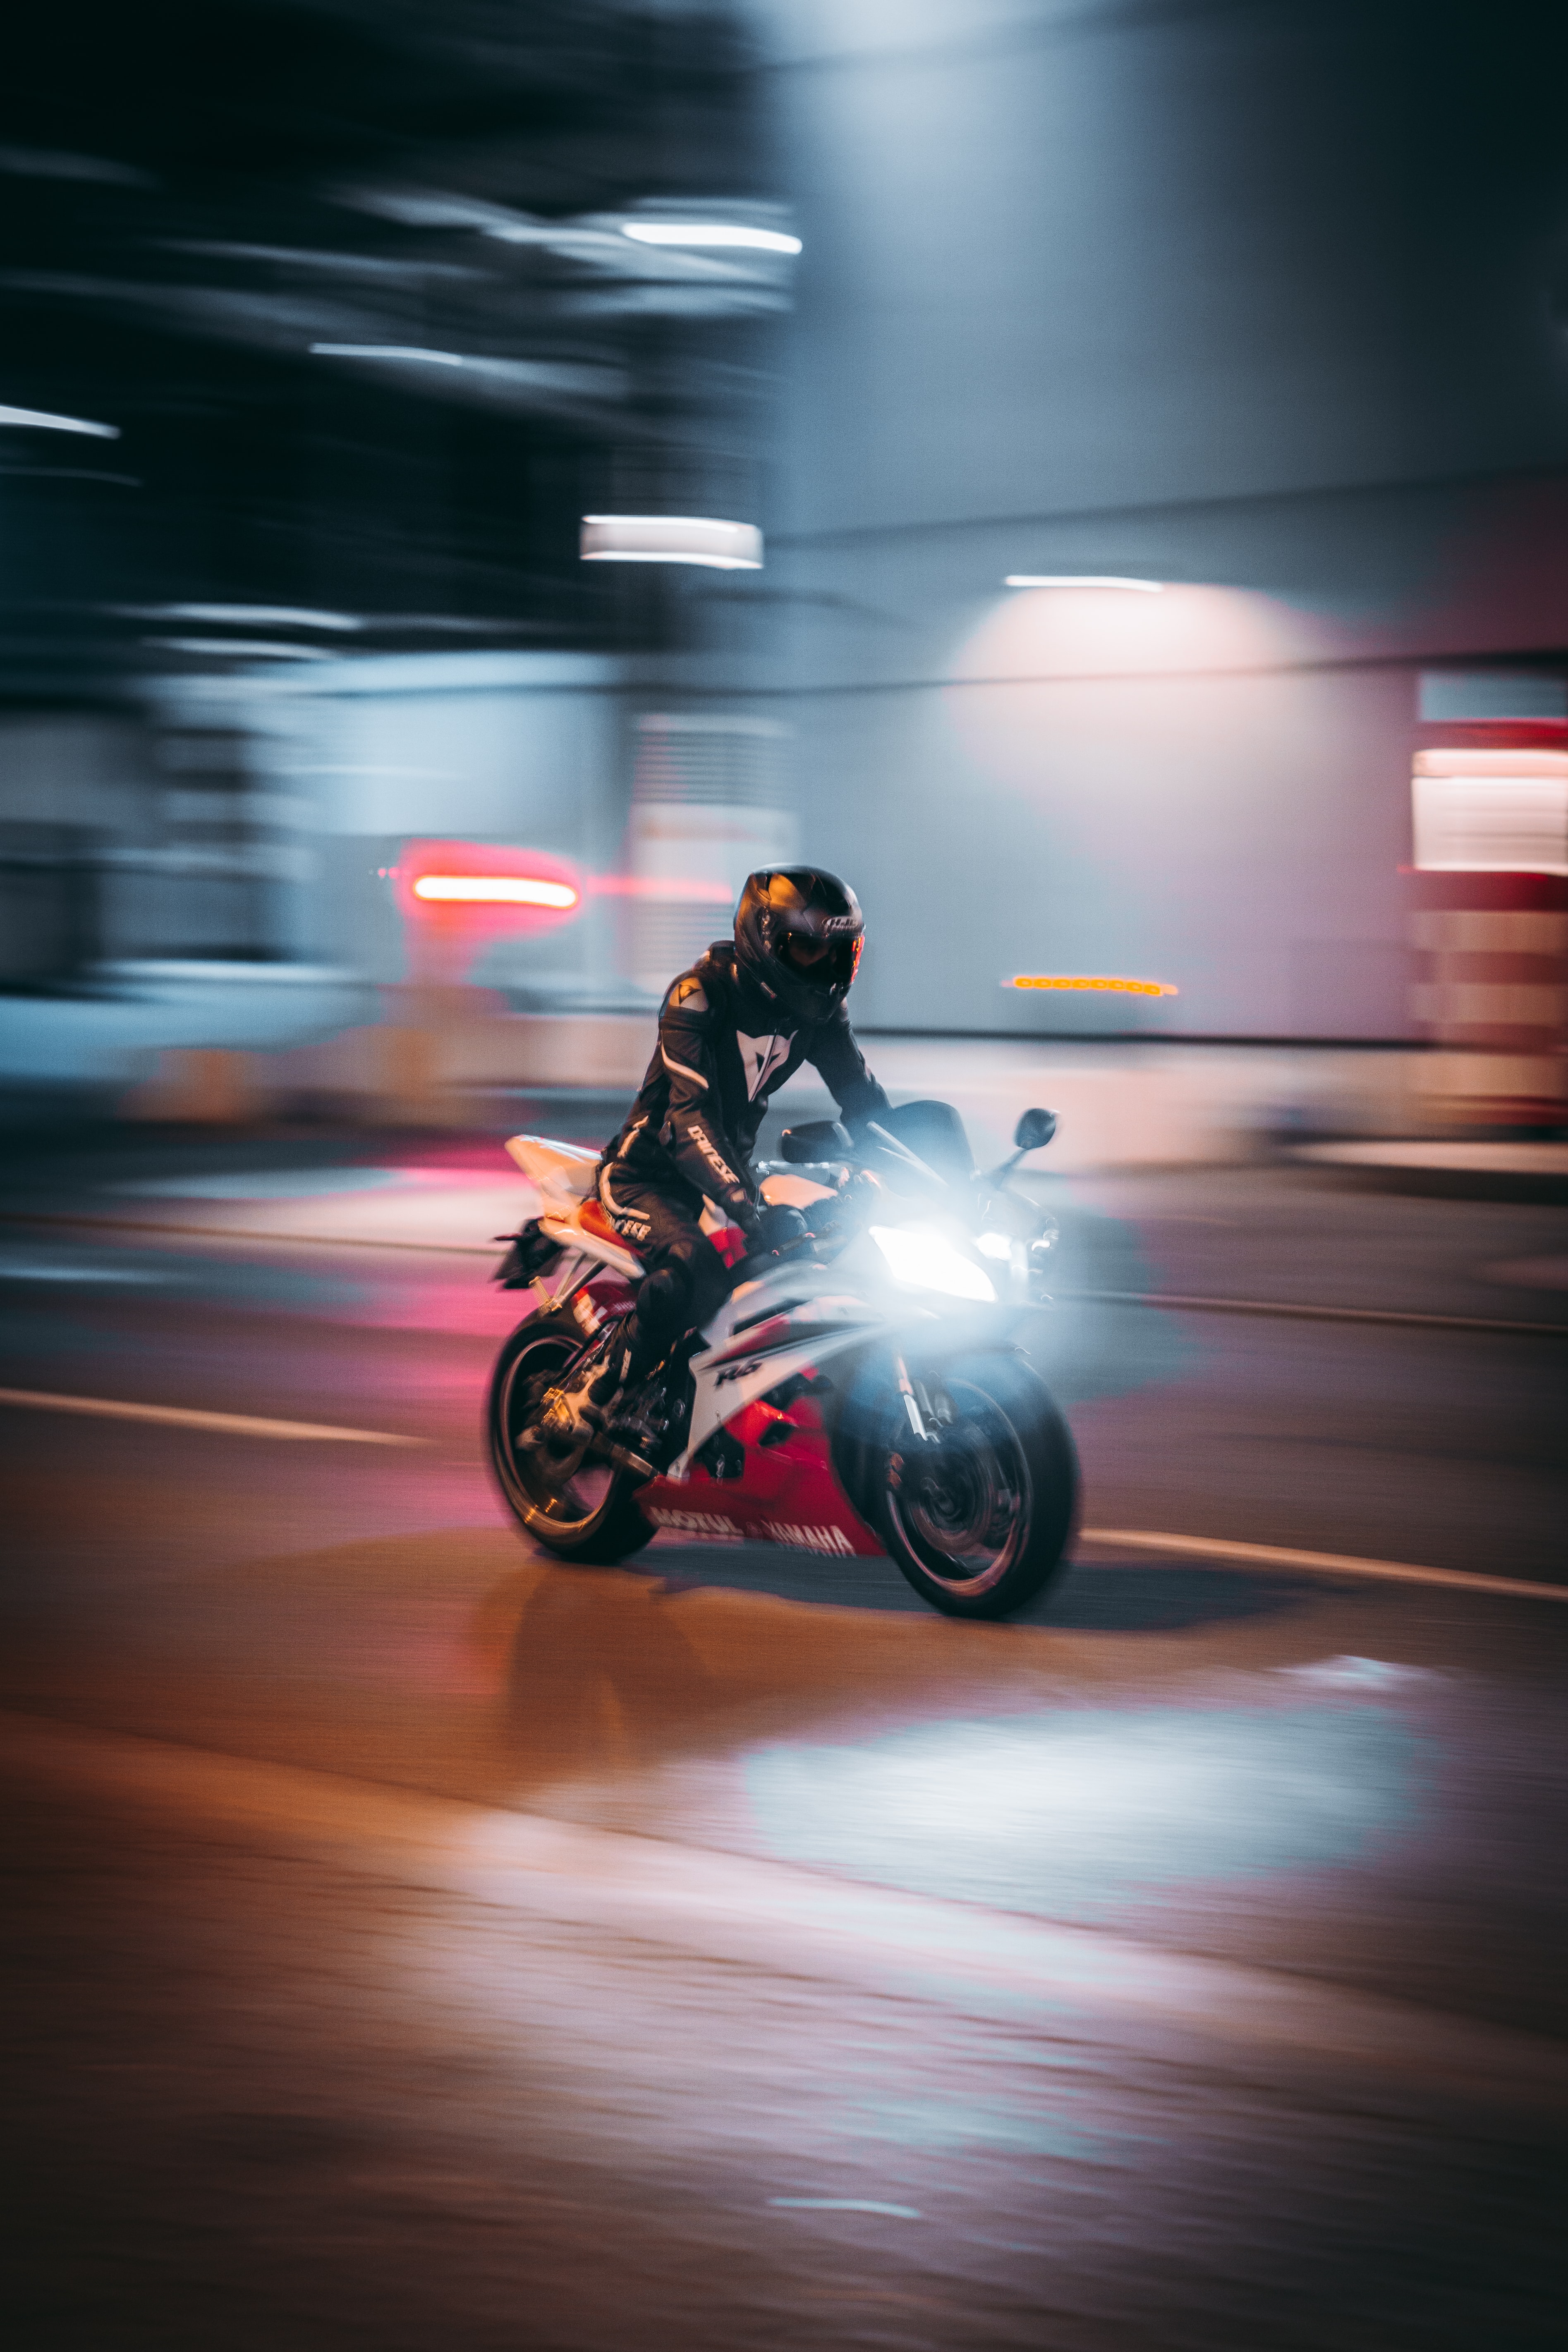 speed, motorcyclist, shine, bike, motorcycles, light, road, motorcycle